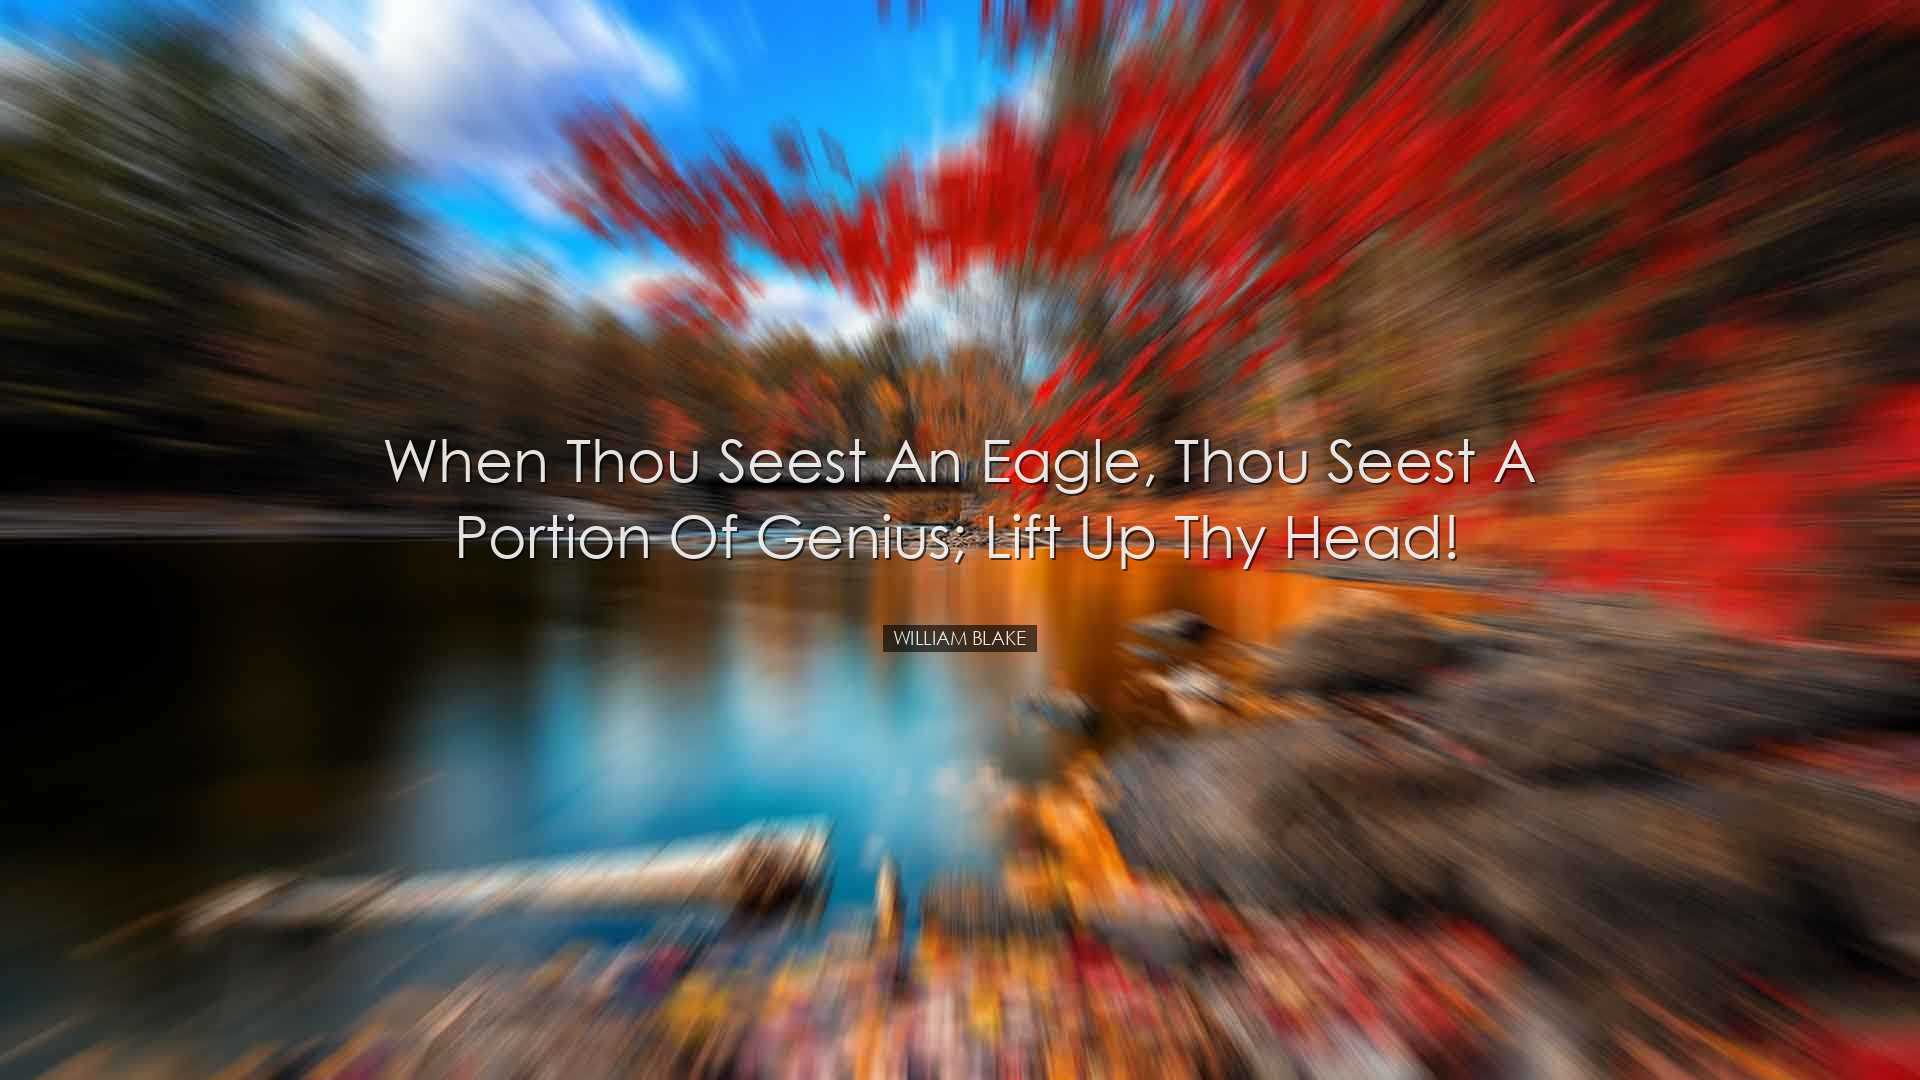 When thou seest an eagle, thou seest a portion of genius; lift up